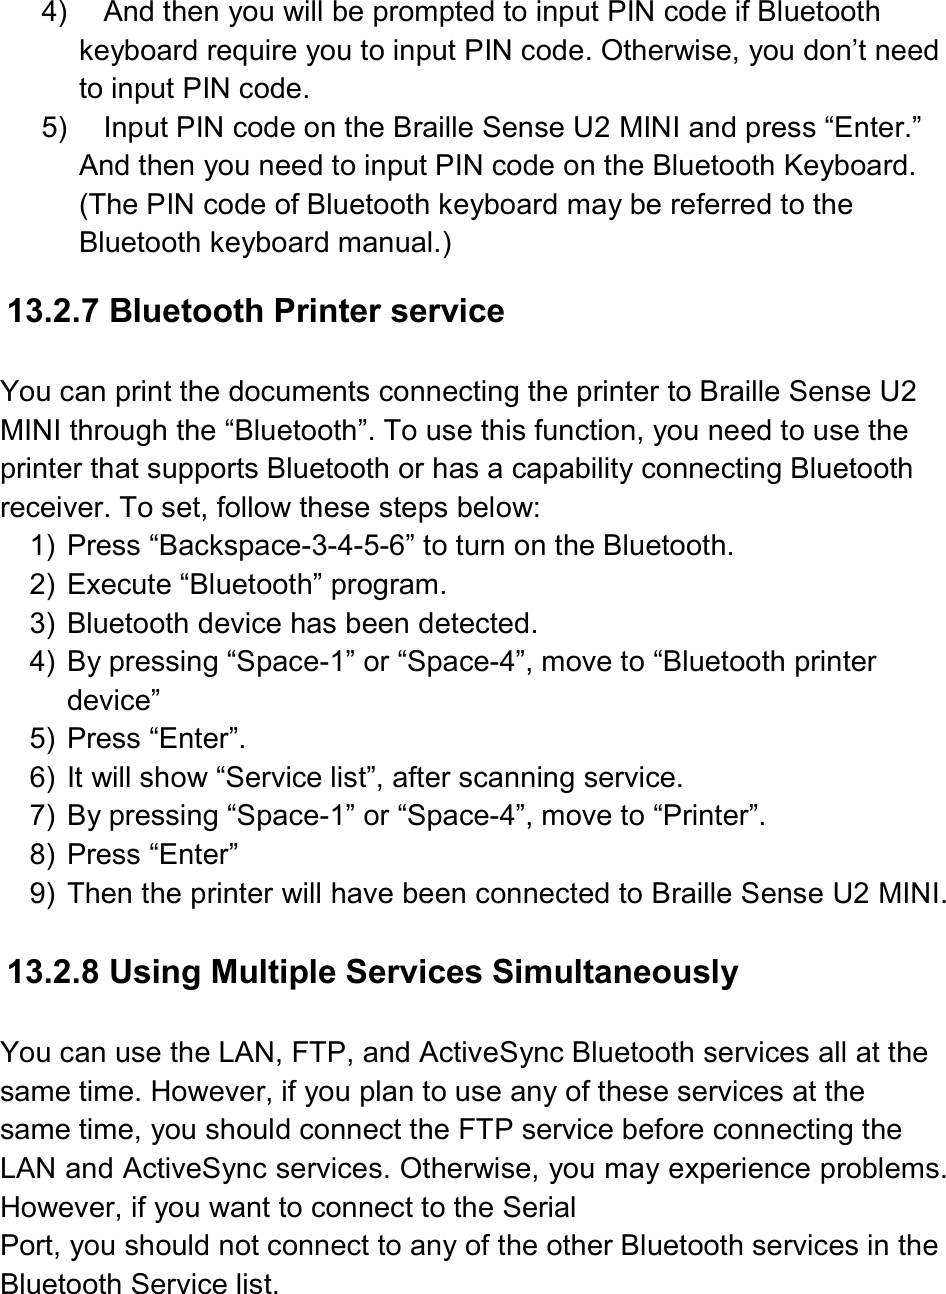  4)  And then you will be prompted to input PIN code if Bluetooth keyboard require you to input PIN code. Otherwise, you don’t need to input PIN code. 5)  Input PIN code on the Braille Sense U2 MINI and press “Enter.” And then you need to input PIN code on the Bluetooth Keyboard. (The PIN code of Bluetooth keyboard may be referred to the Bluetooth keyboard manual.)  13.2.7 Bluetooth Printer service  You can print the documents connecting the printer to Braille Sense U2 MINI through the “Bluetooth”. To use this function, you need to use the printer that supports Bluetooth or has a capability connecting Bluetooth receiver. To set, follow these steps below: 1)  Press “Backspace-3-4-5-6” to turn on the Bluetooth. 2)  Execute “Bluetooth” program. 3)  Bluetooth device has been detected. 4)  By pressing “Space-1” or “Space-4”, move to “Bluetooth printer device”   5)  Press “Enter”. 6)  It will show “Service list”, after scanning service. 7)  By pressing “Space-1” or “Space-4”, move to “Printer”. 8)  Press “Enter”   9)  Then the printer will have been connected to Braille Sense U2 MINI.  13.2.8 Using Multiple Services Simultaneously  You can use the LAN, FTP, and ActiveSync Bluetooth services all at the same time. However, if you plan to use any of these services at the same time, you should connect the FTP service before connecting the LAN and ActiveSync services. Otherwise, you may experience problems. However, if you want to connect to the Serial   Port, you should not connect to any of the other Bluetooth services in the Bluetooth Service list.  